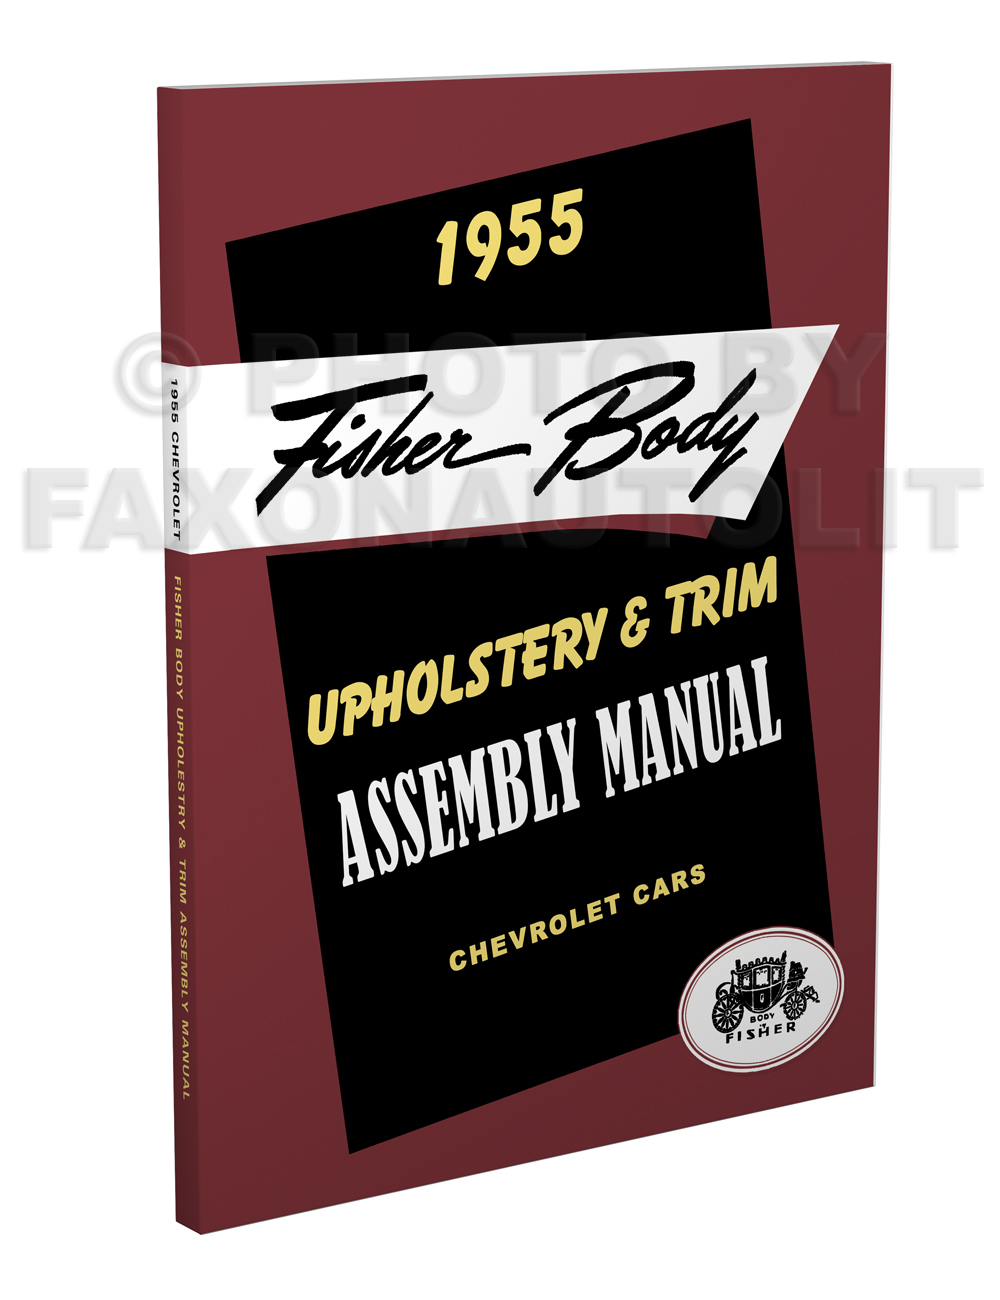 1955 Fisher Body Upholstery and Trim Assembly Manual Chevy Cars